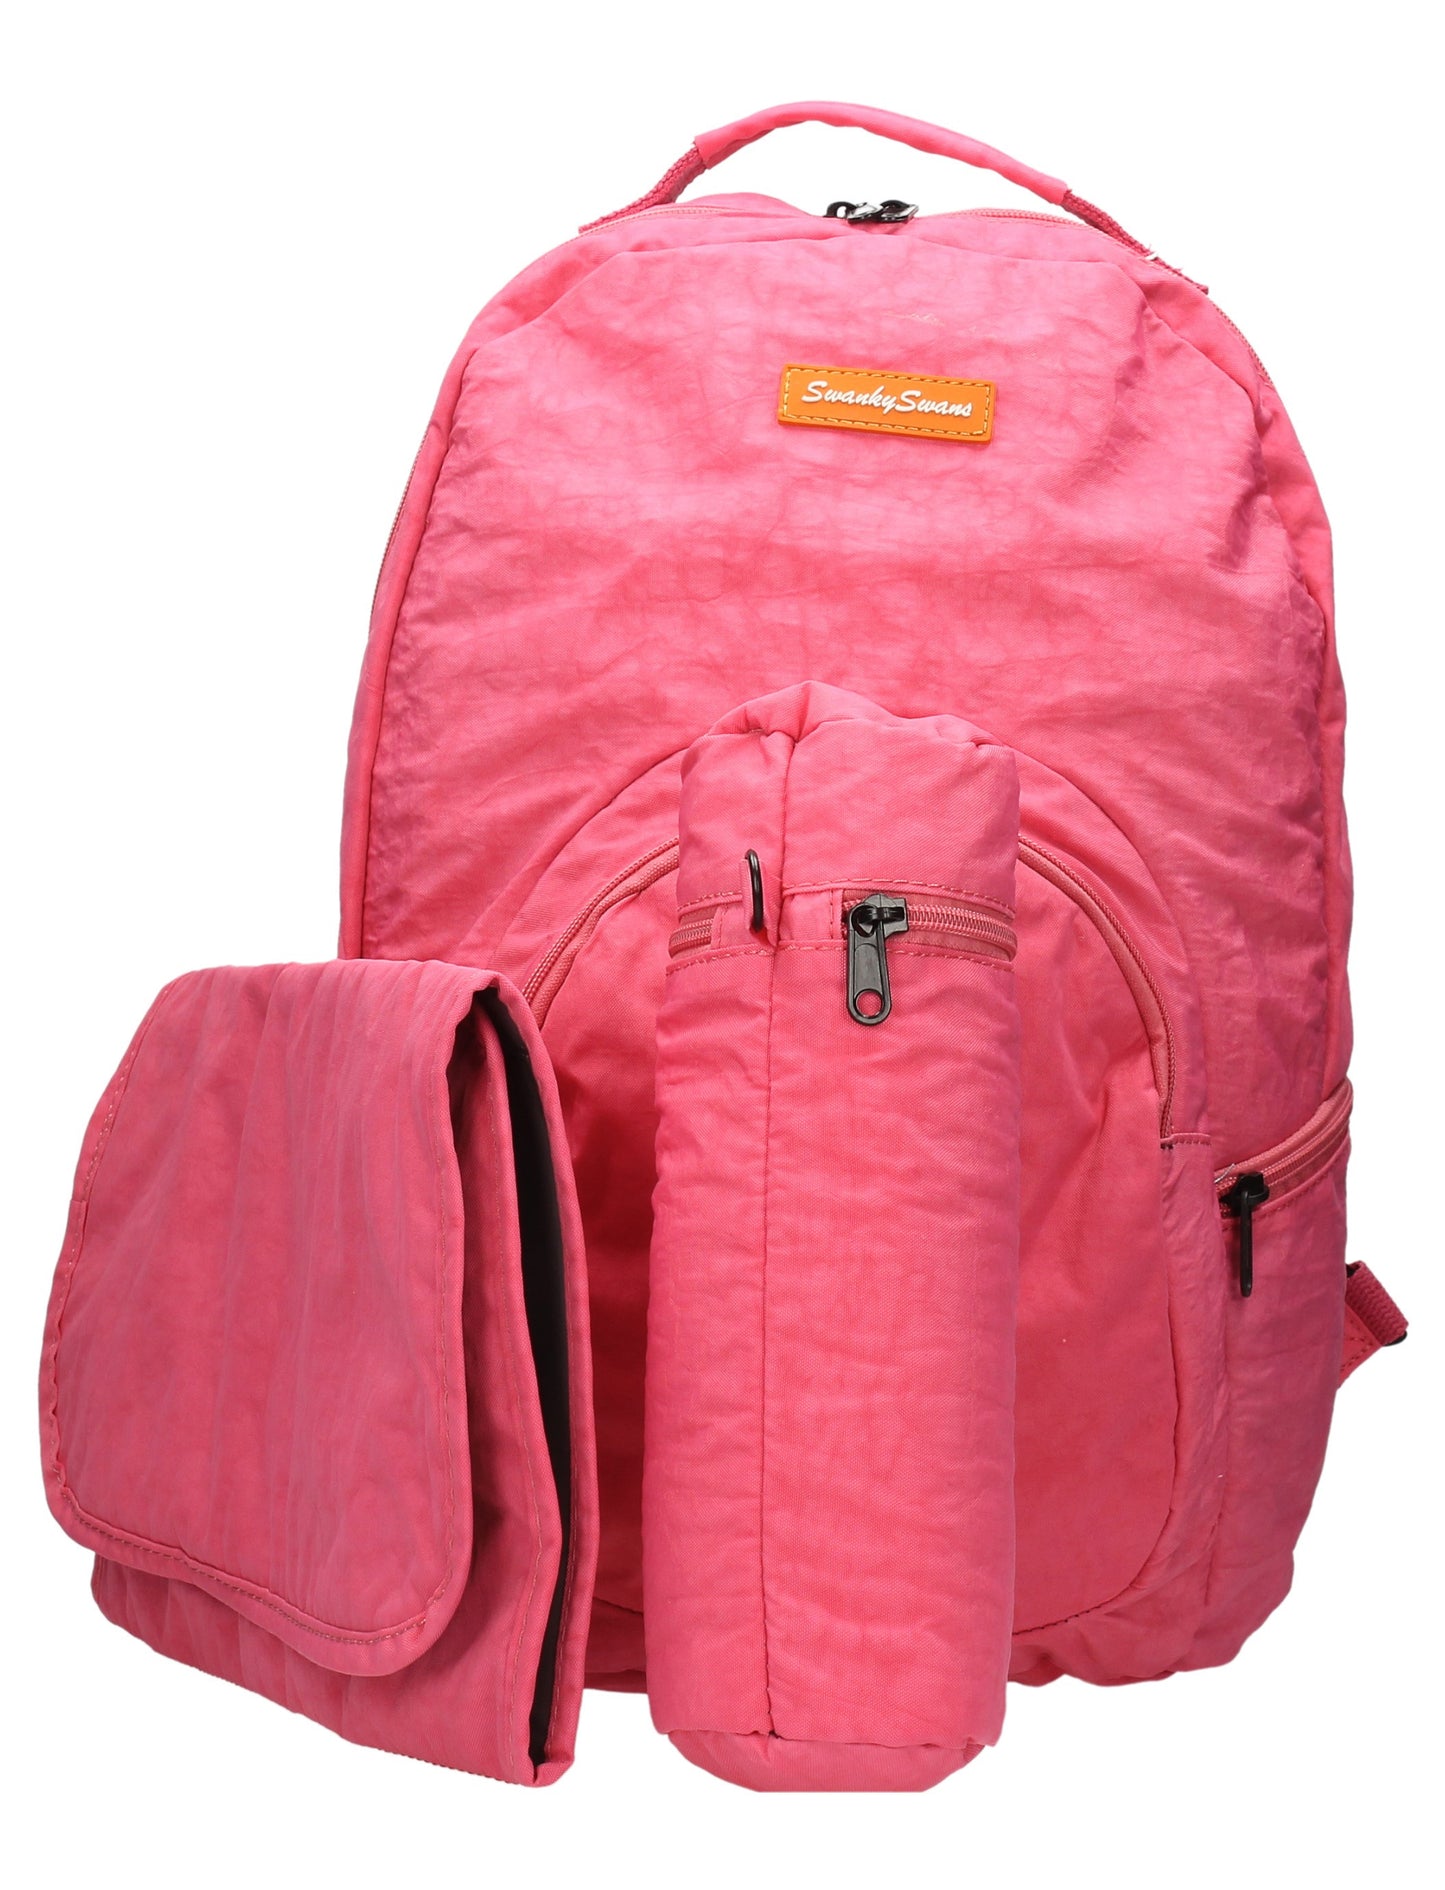 Joseph & Mary Baby Changing Backpack - Pink-Baby Changing-SWANKYSWANS